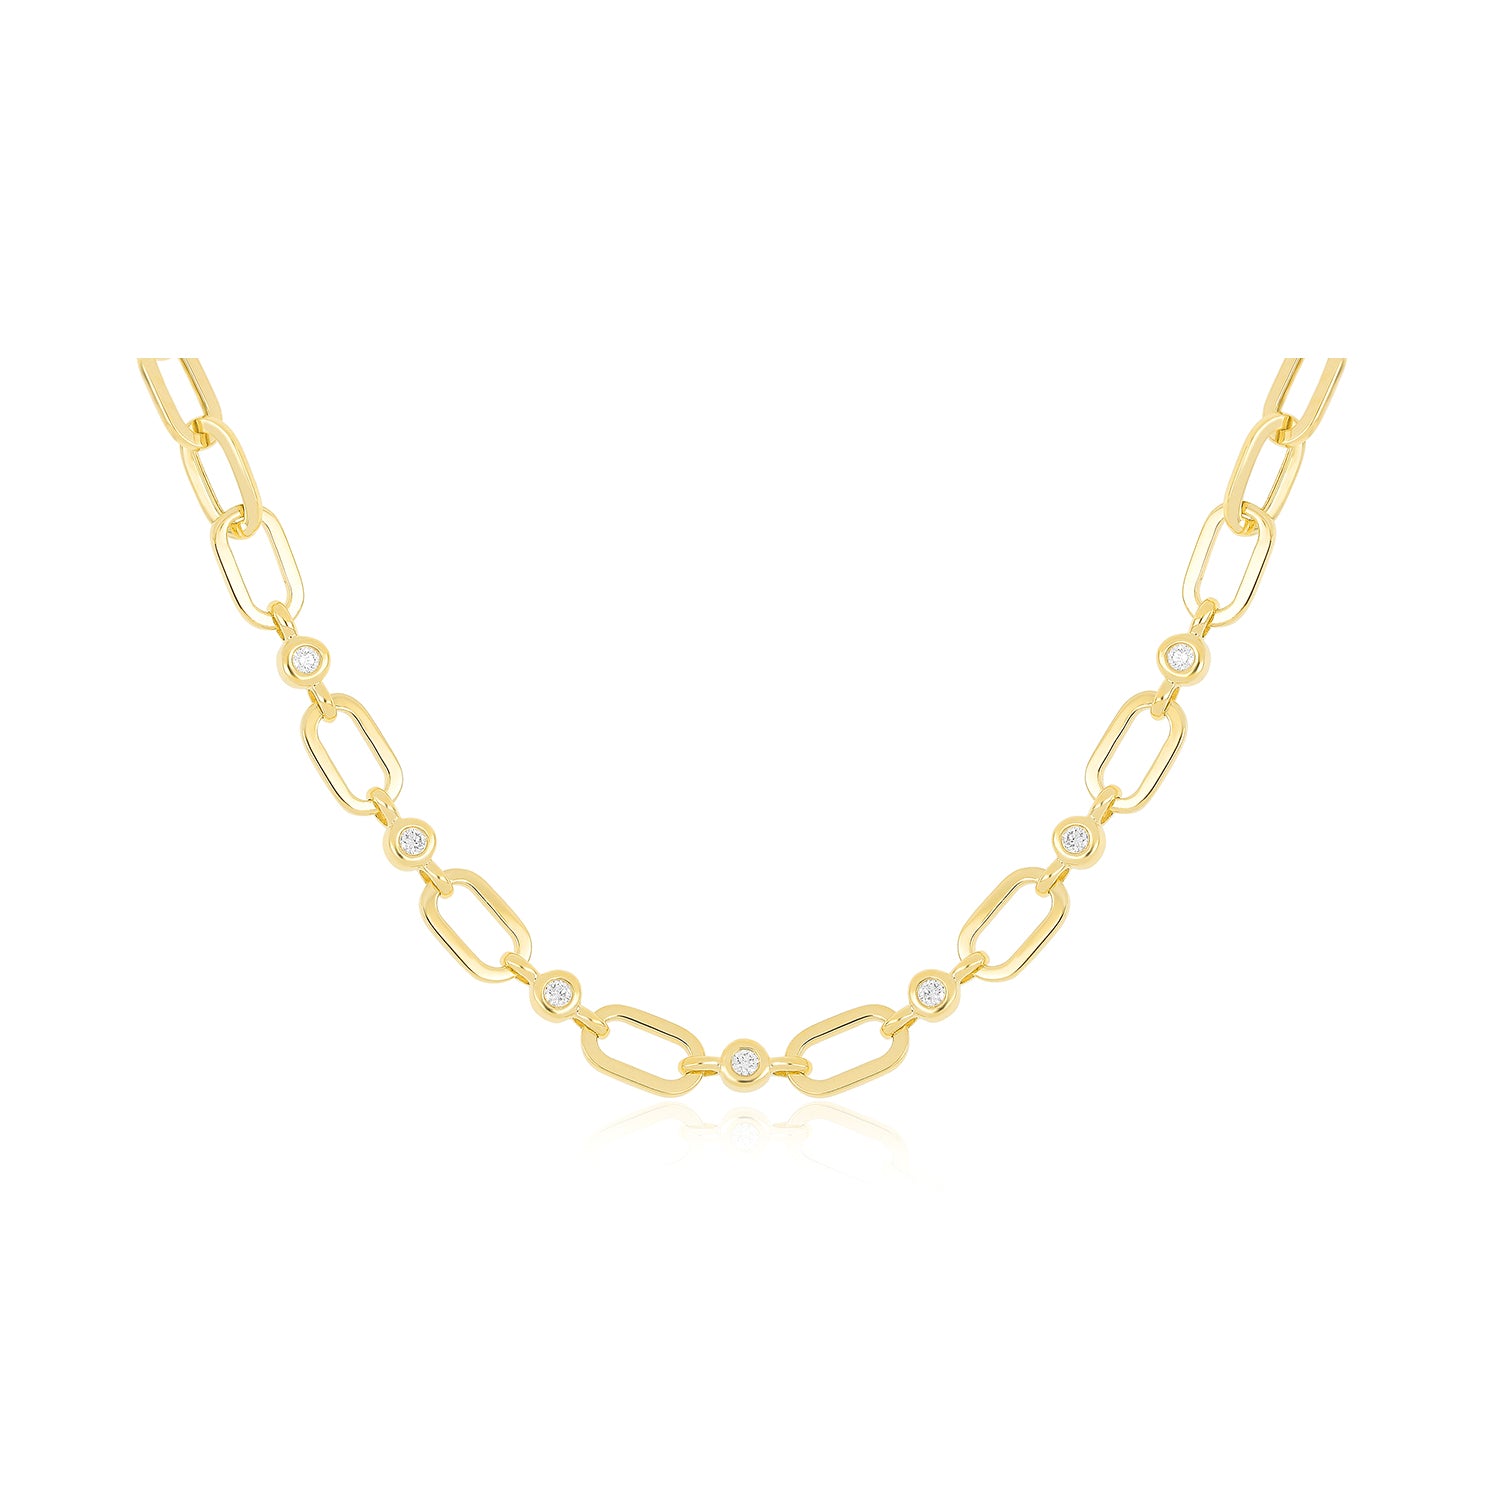 Diamond Pillow Jumbo Link Chain Necklace in 14k yellow gold